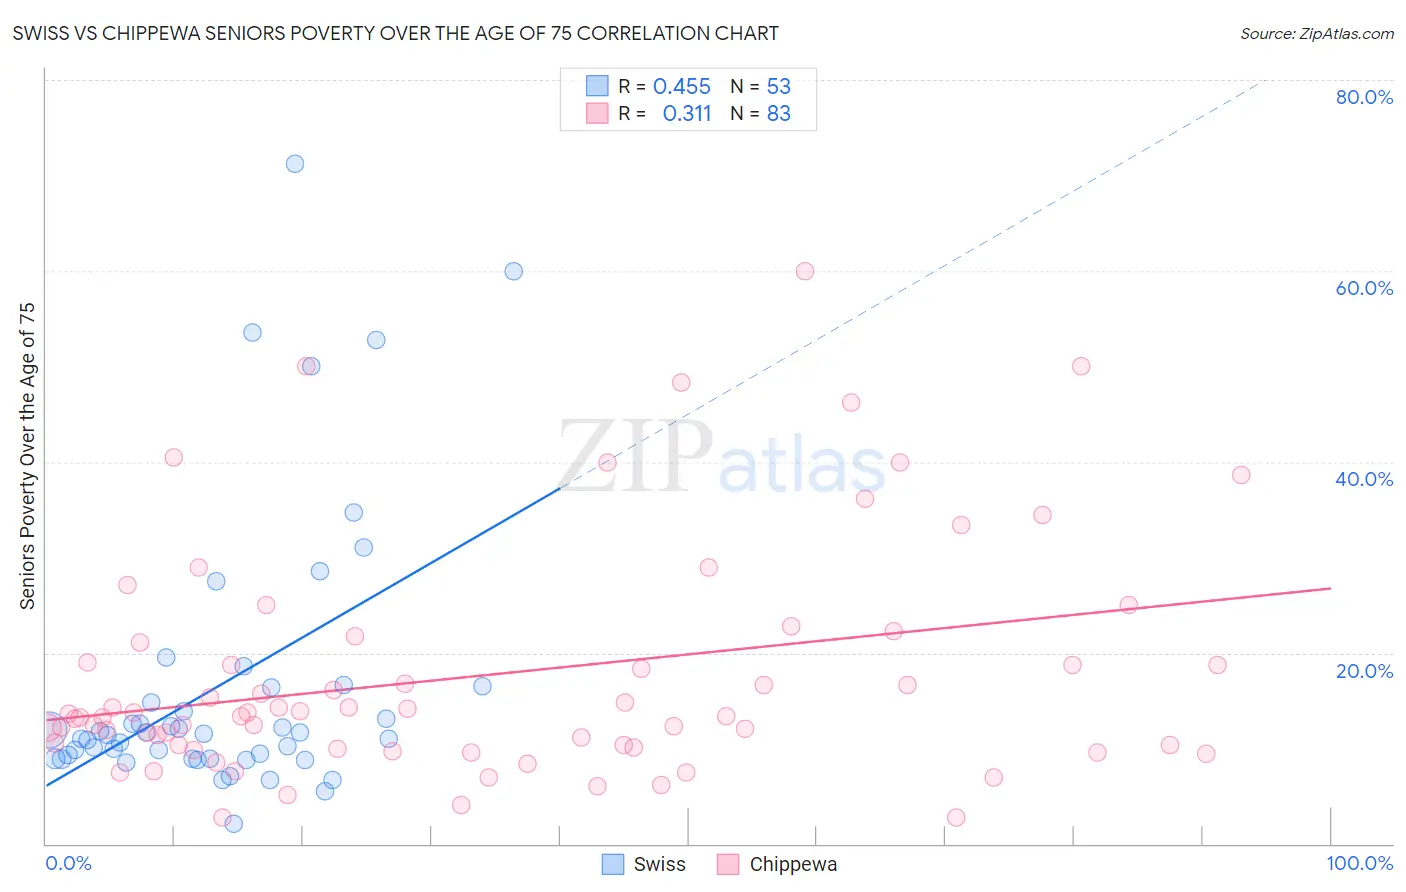 Swiss vs Chippewa Seniors Poverty Over the Age of 75